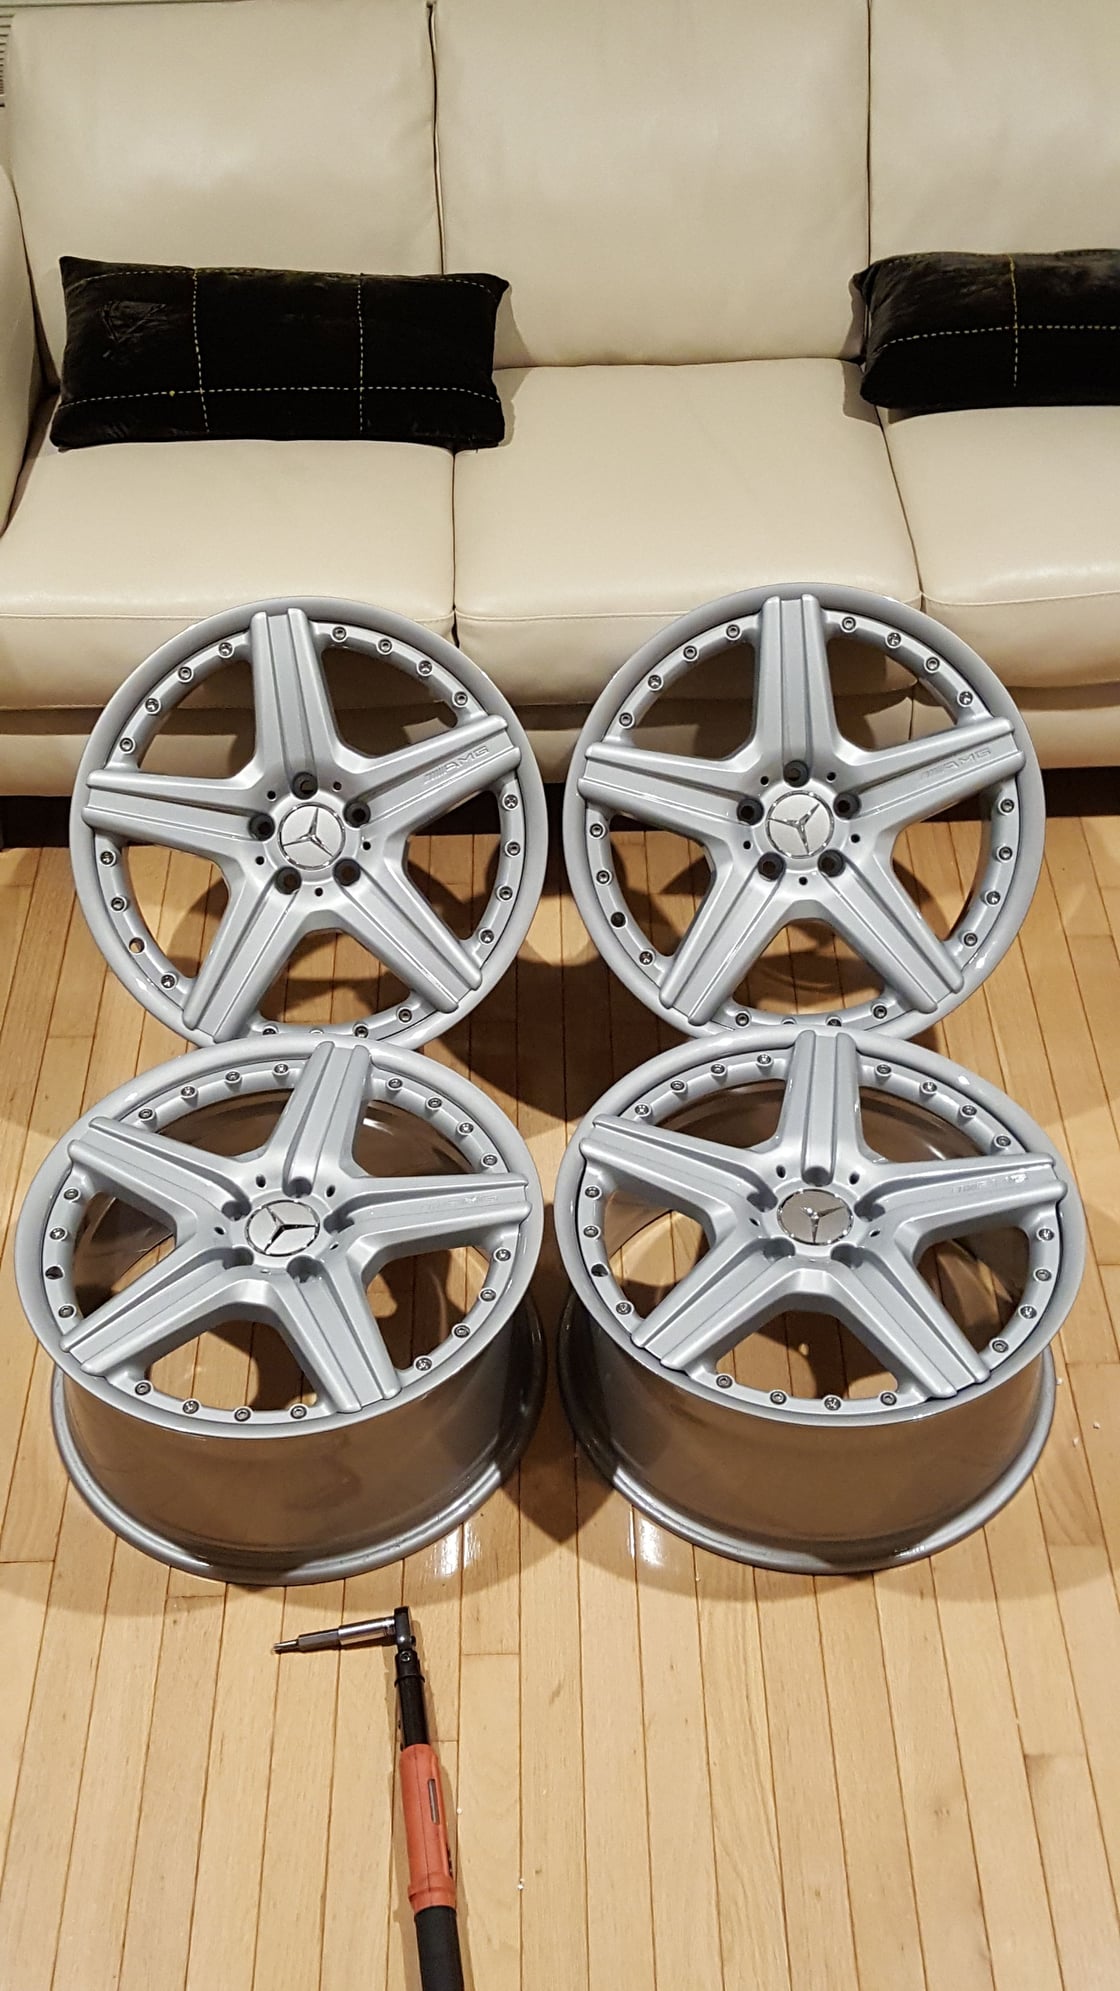 Wheels and Tires/Axles - 2 piece AMG style VI 19x8.5/9.5 - New - Eldersburg, MD 21784, United States